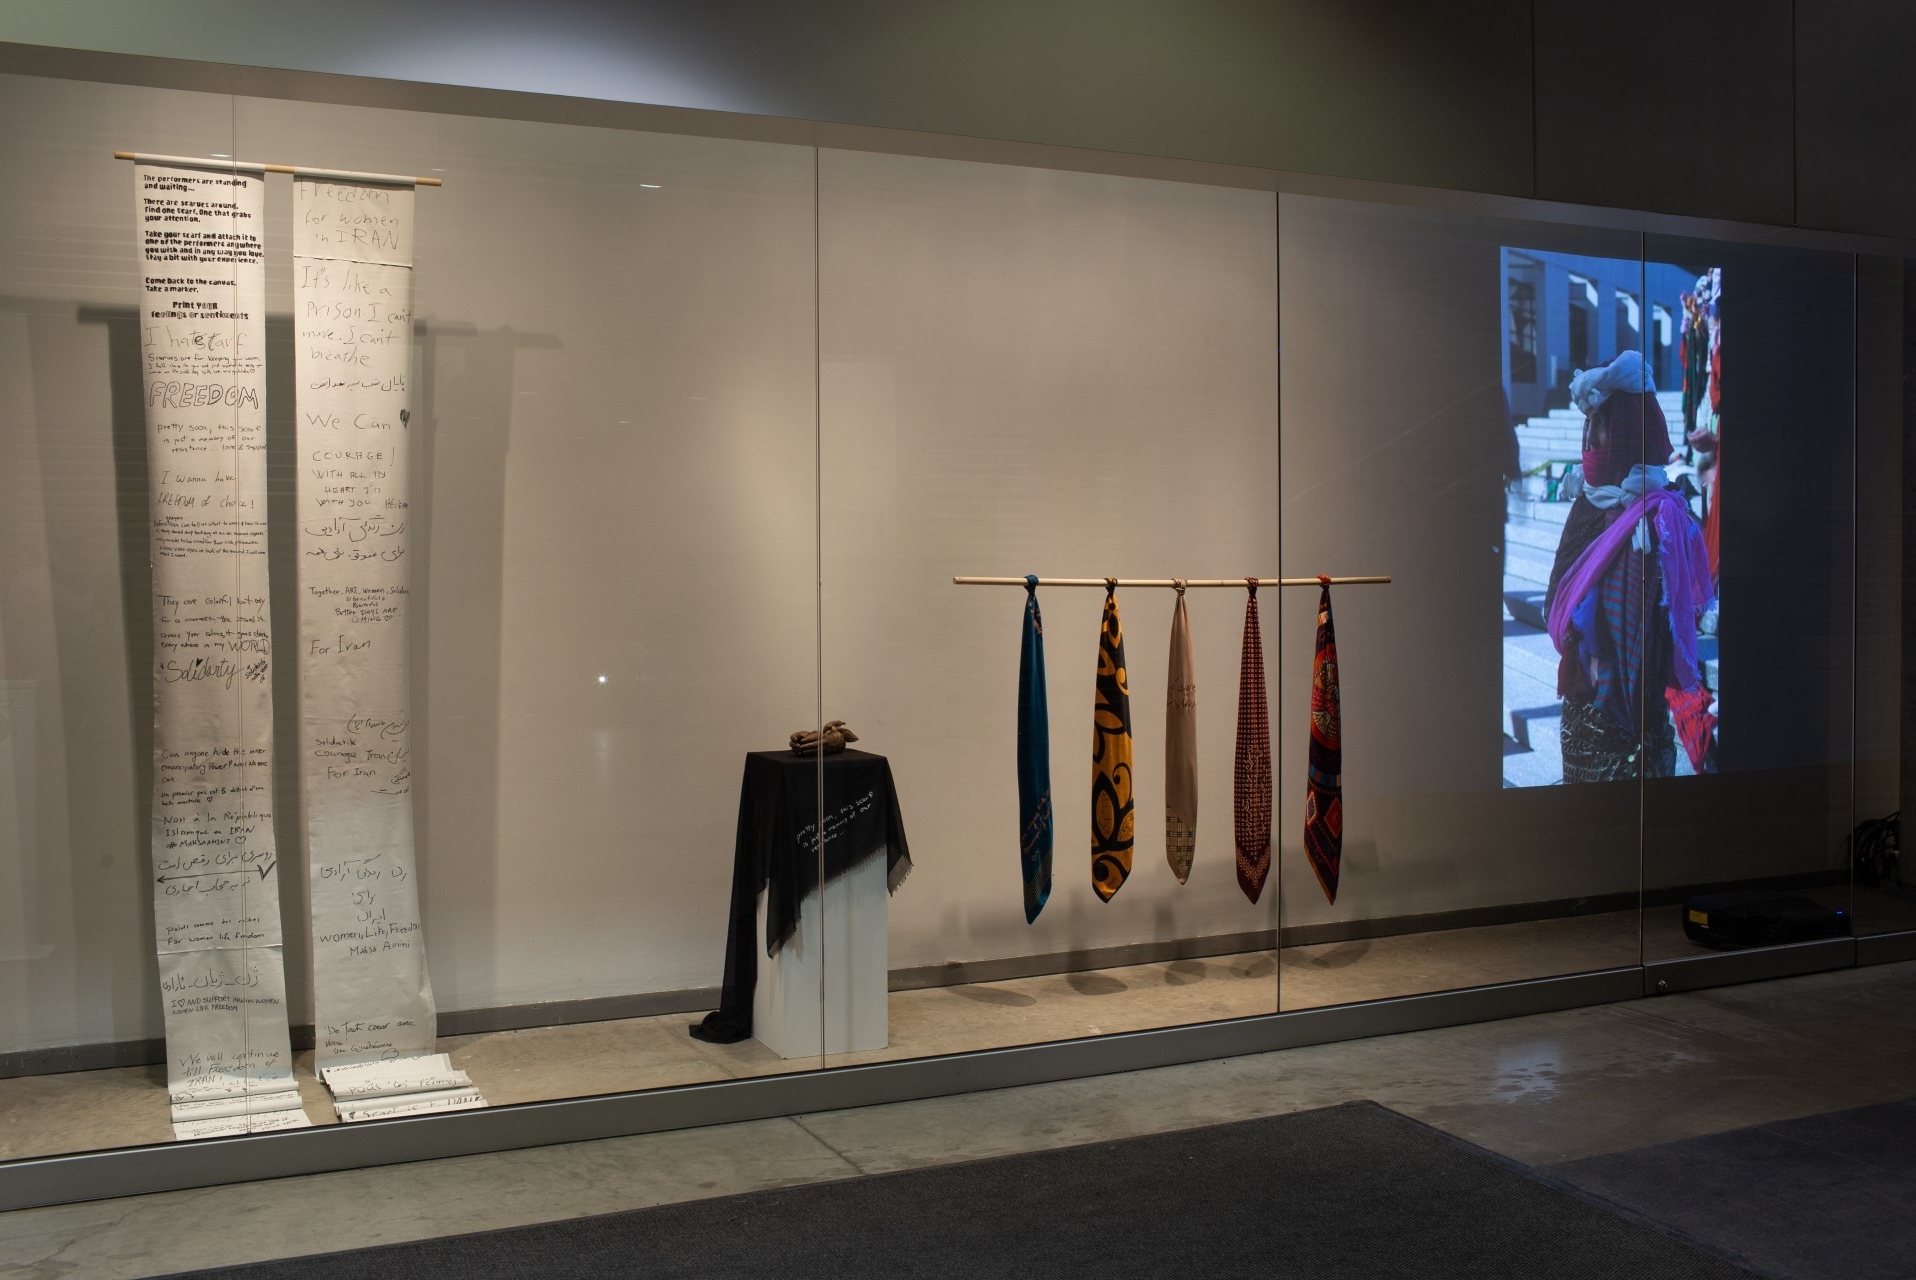 Installation view of This is not a scarf featuring a projection for a video performance, bronze casted hands, scrolls with written testimonies from the performance participants, and silkscreened scarves. 